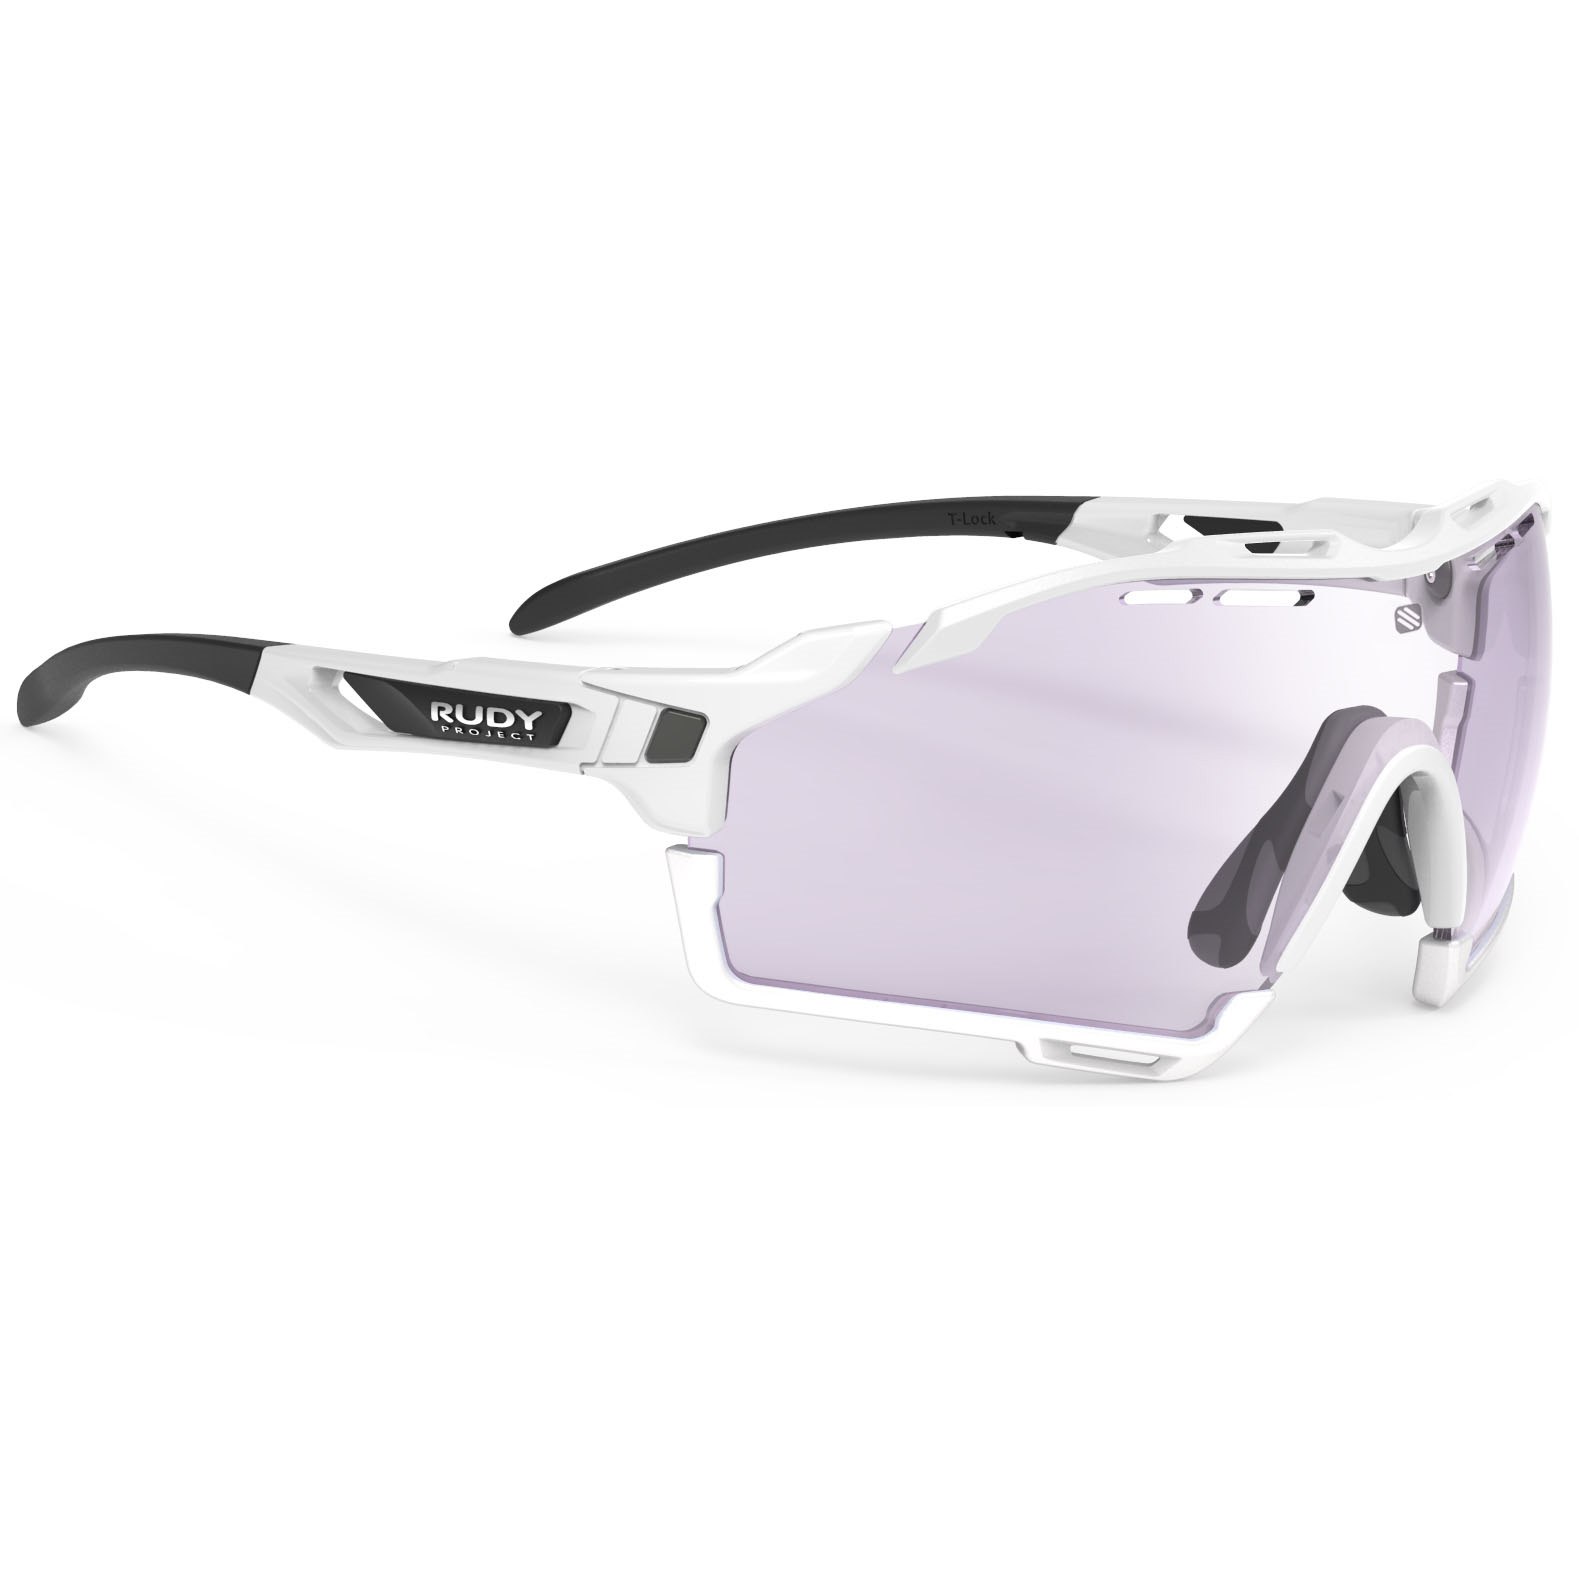 Image of Rudy Project Cutline Glasses - Photochromic Lens - White Gloss / ImpactX 2 Laser Purple